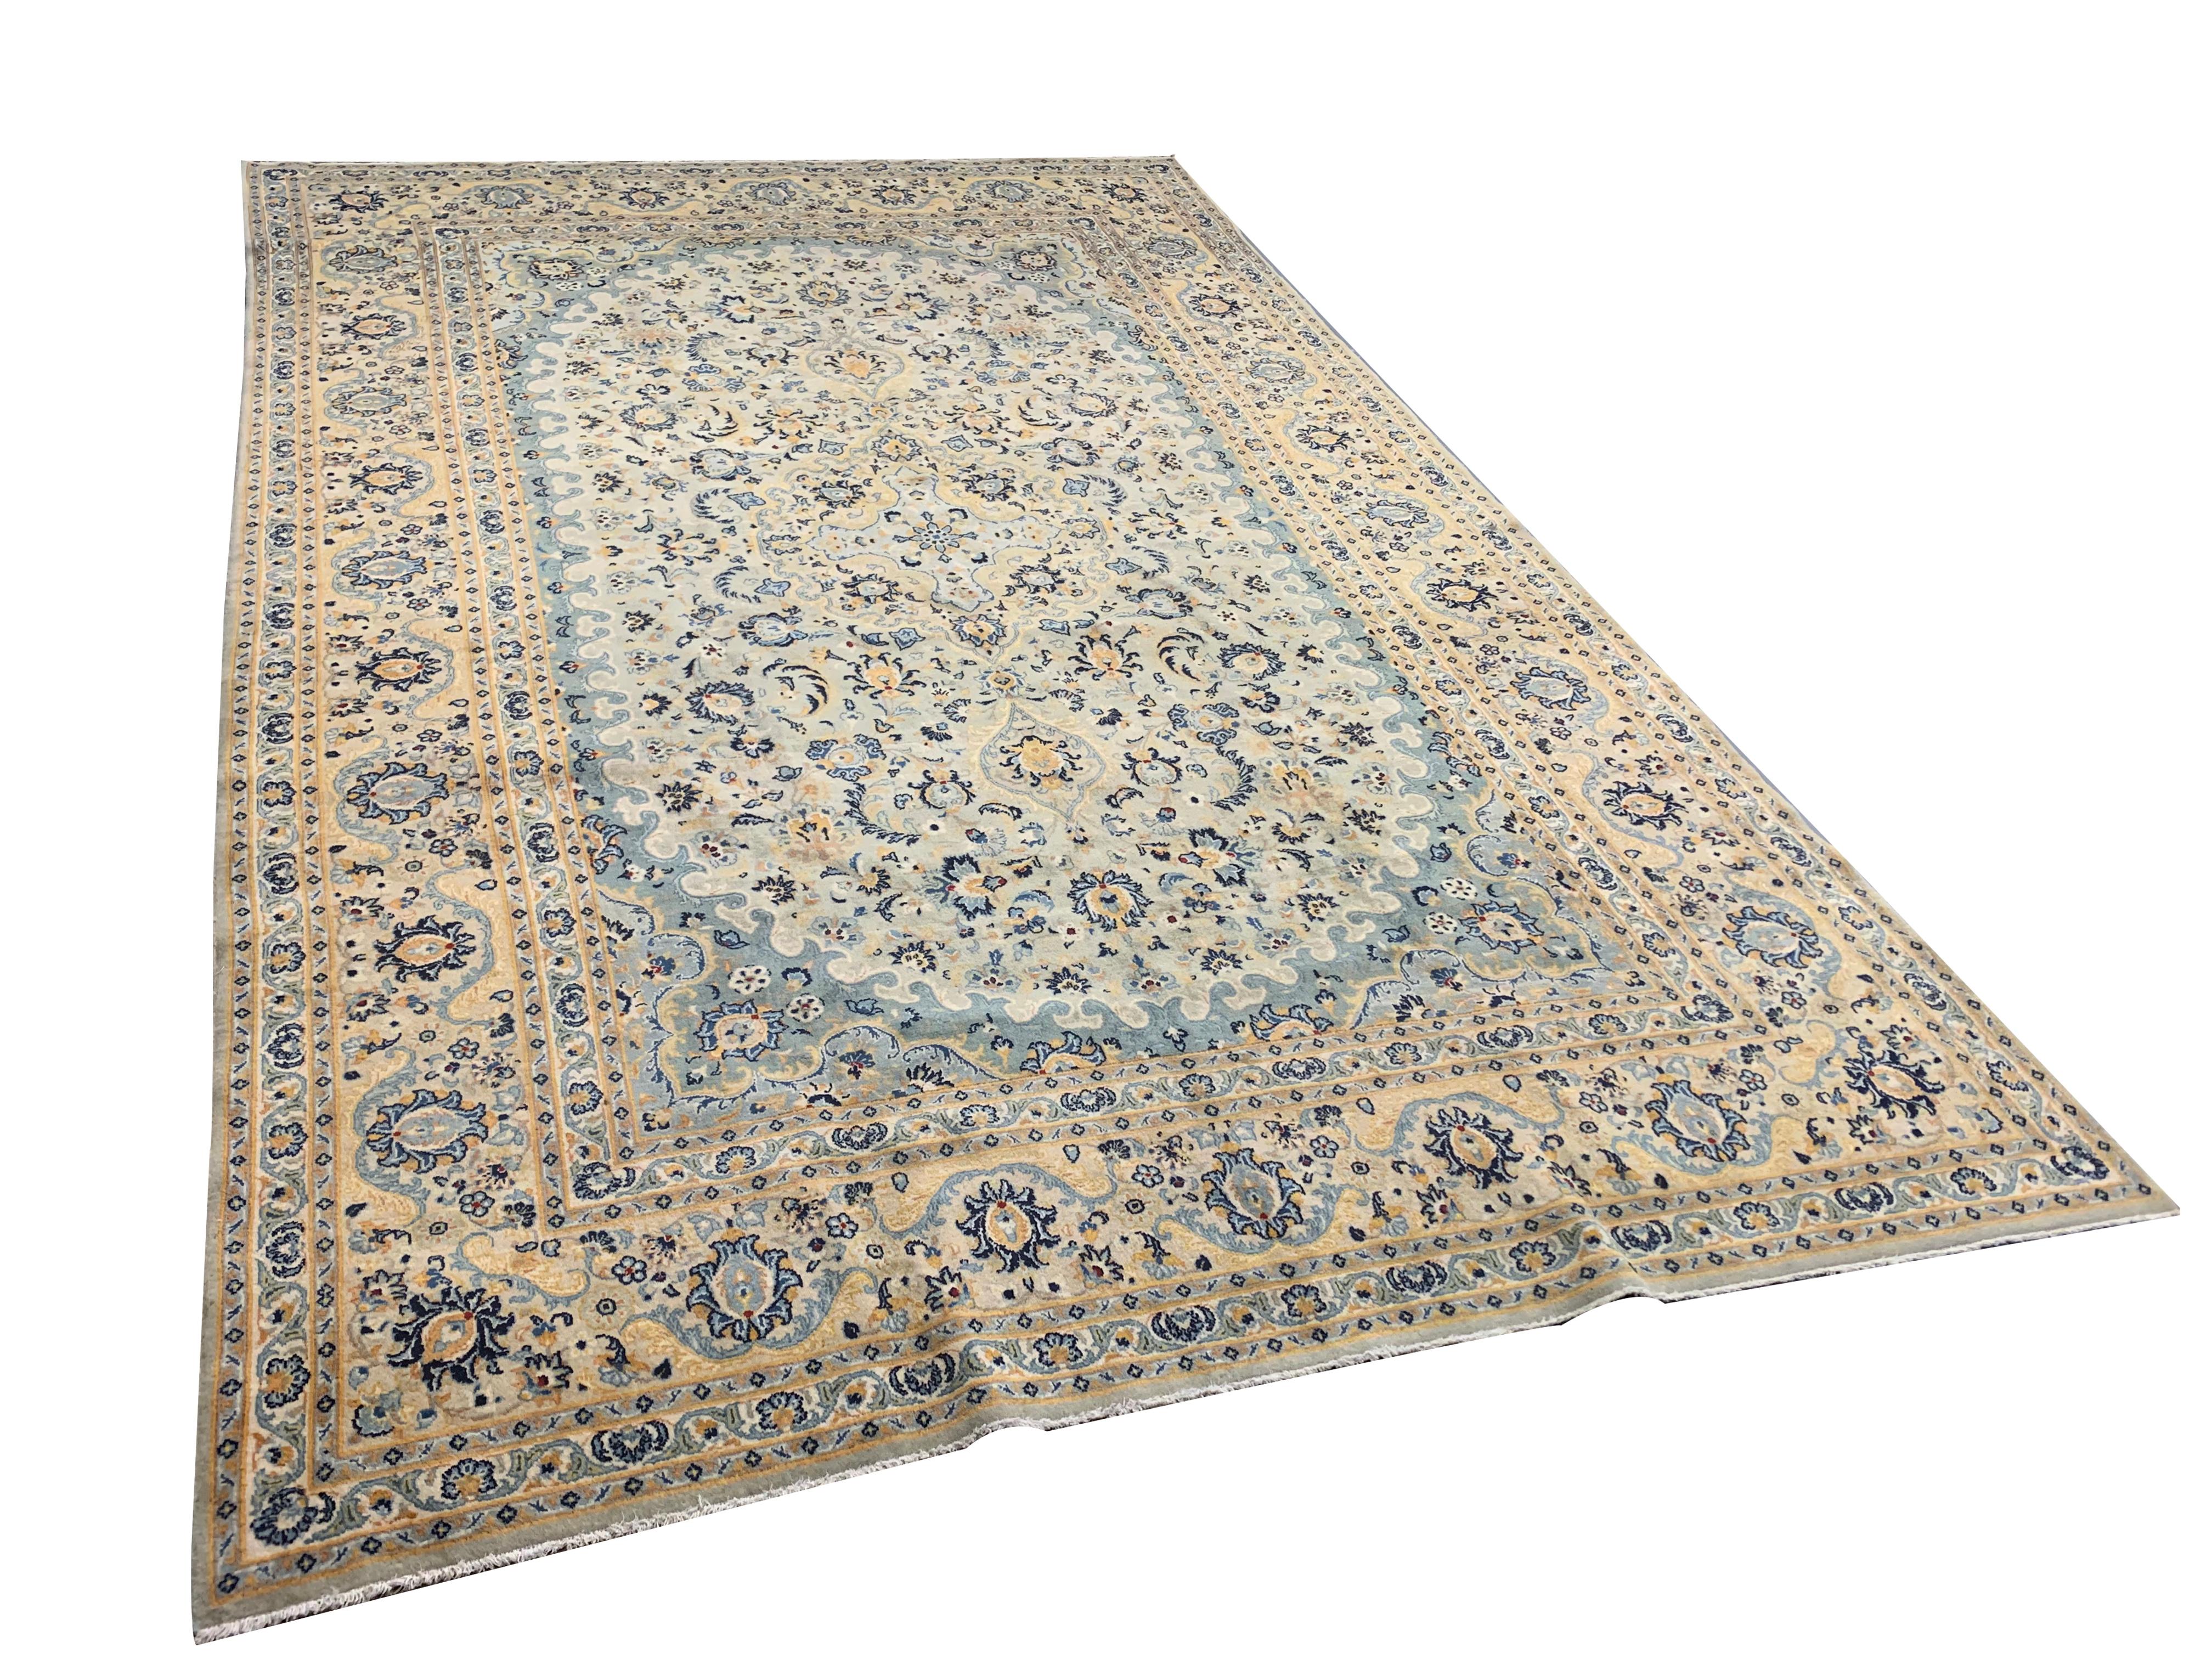 Subtle cream, blue, yellow and beige accents make up the colour palette of this beautiful wool area rug. Woven with a bold floral all-over pattern, intricately woven with fine floral details through both the centre and enclosing border. The